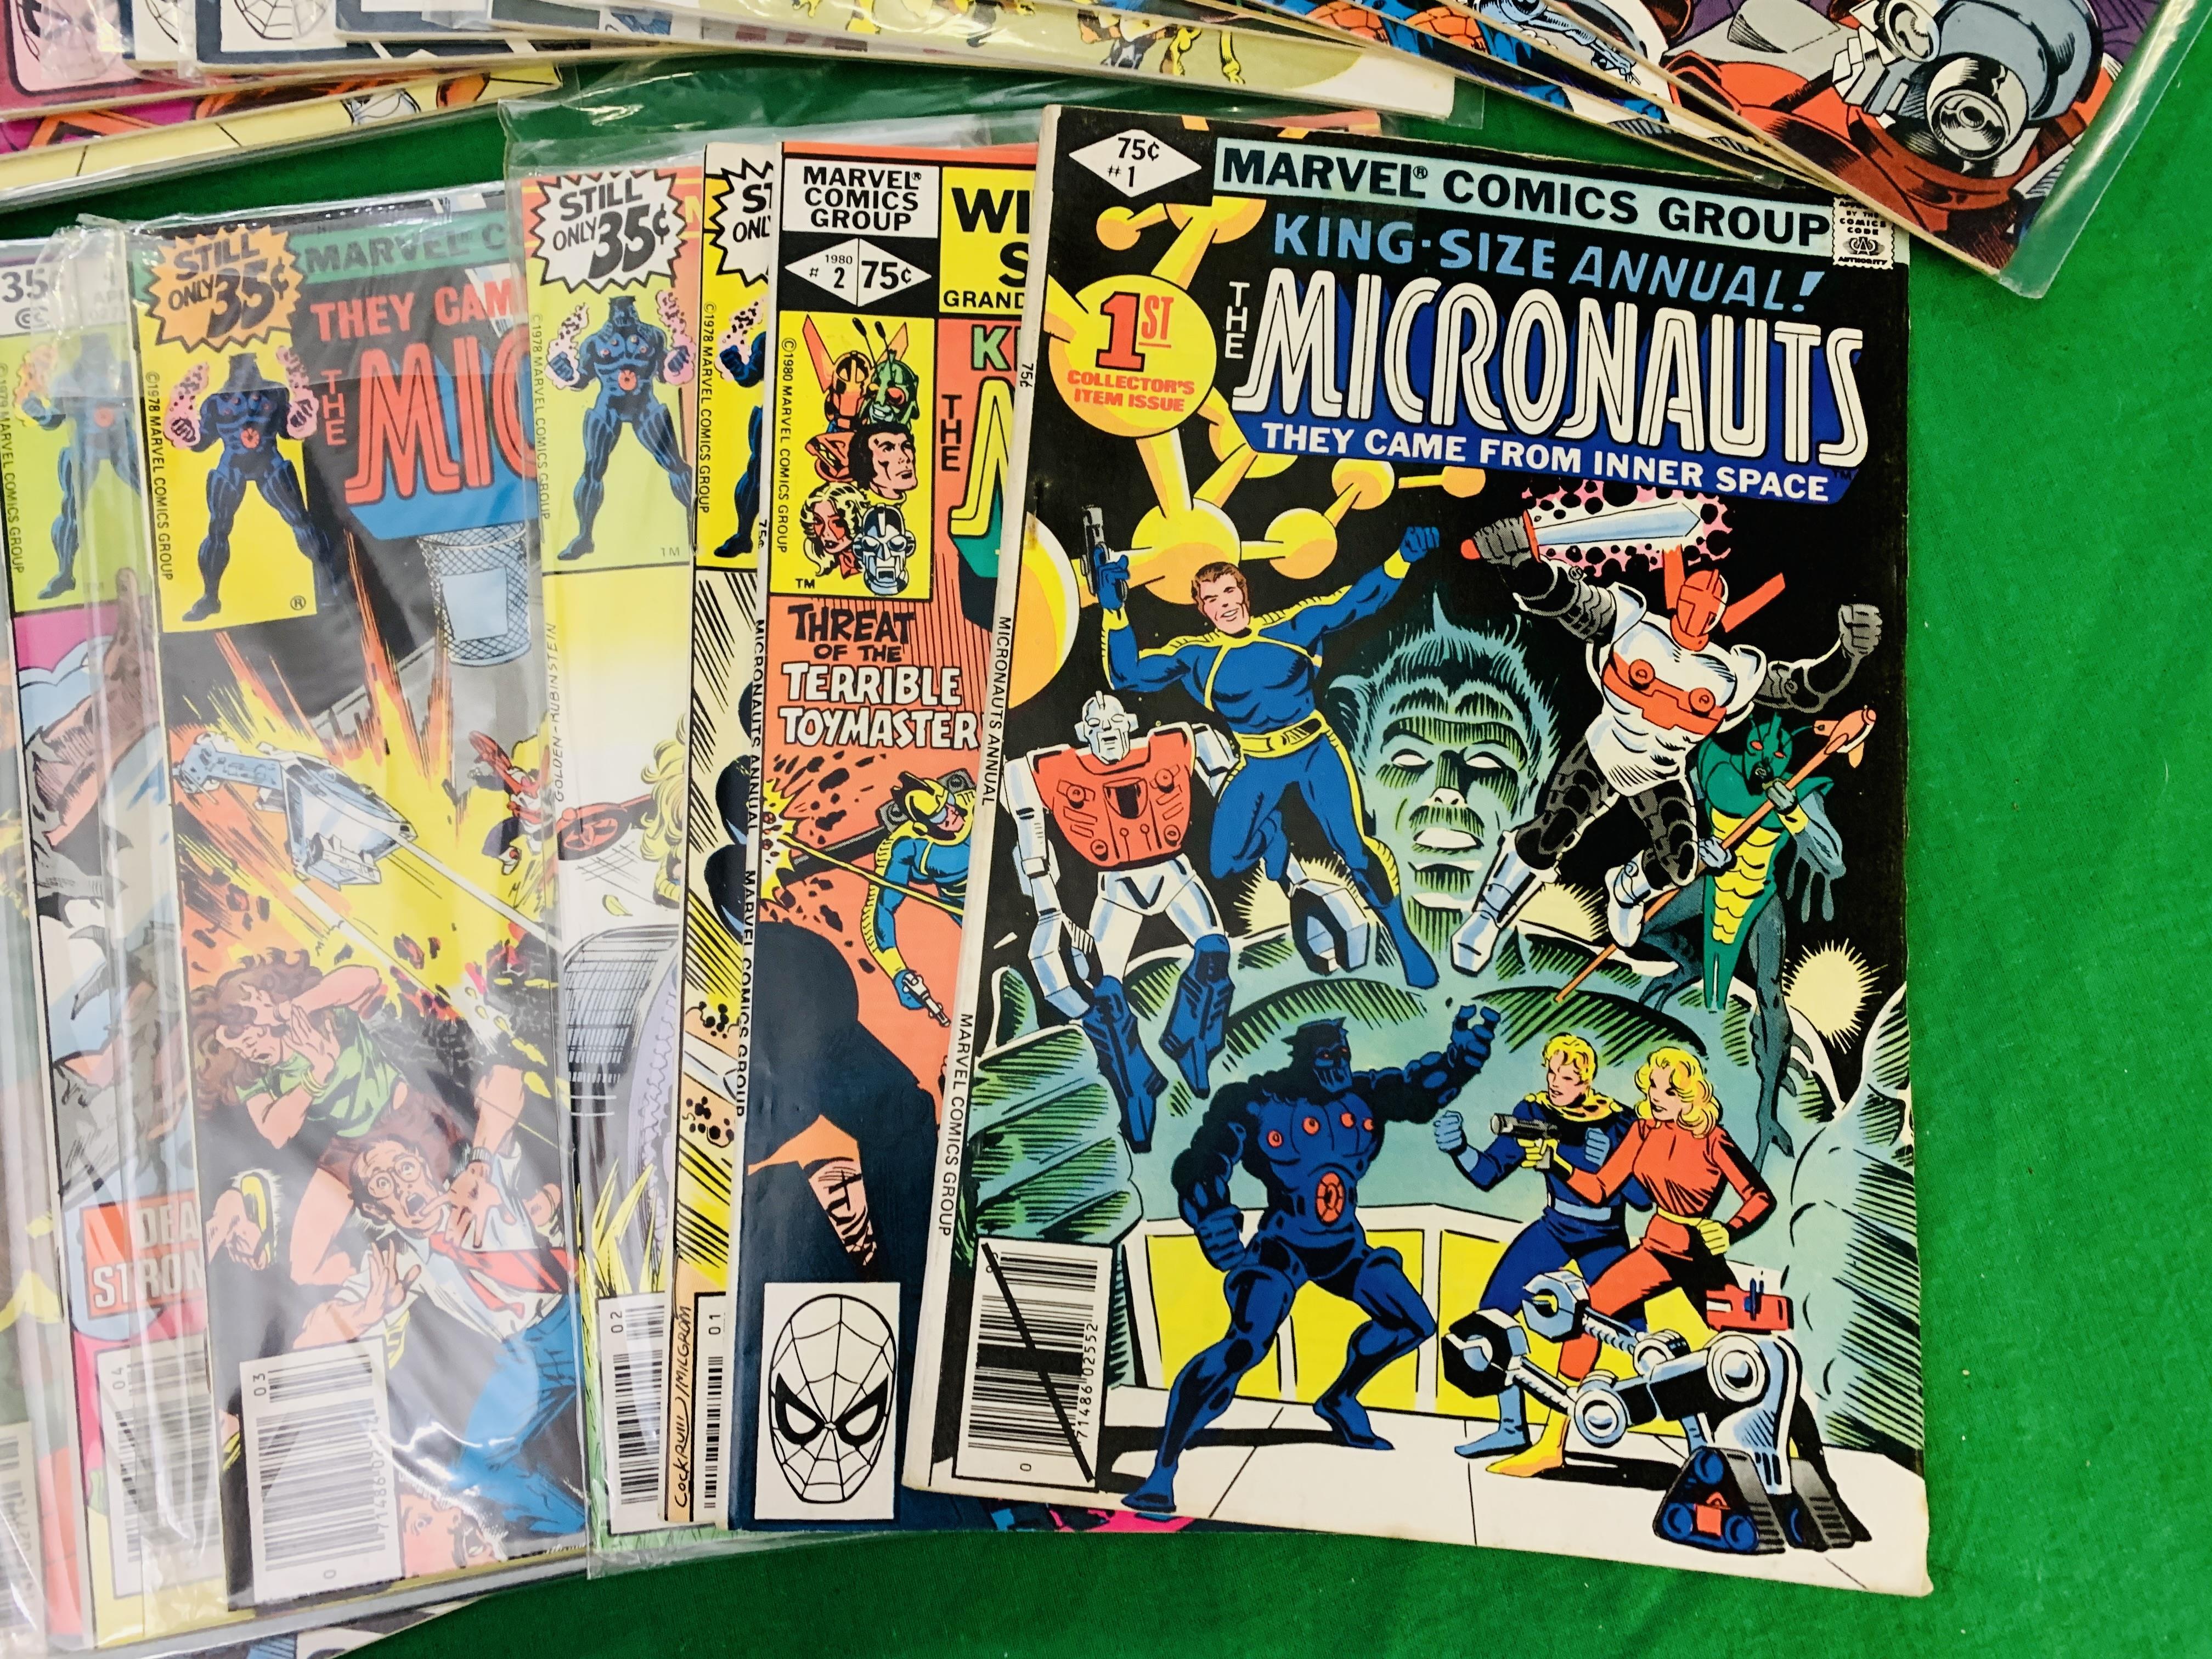 MARVEL COMICS THE MICRONAUTS NO. 1 - 59 FROM 1979. NO. 18 - 19, 21, 37, 53, 57 HAVE RUSTY STAPLES. - Image 16 of 27